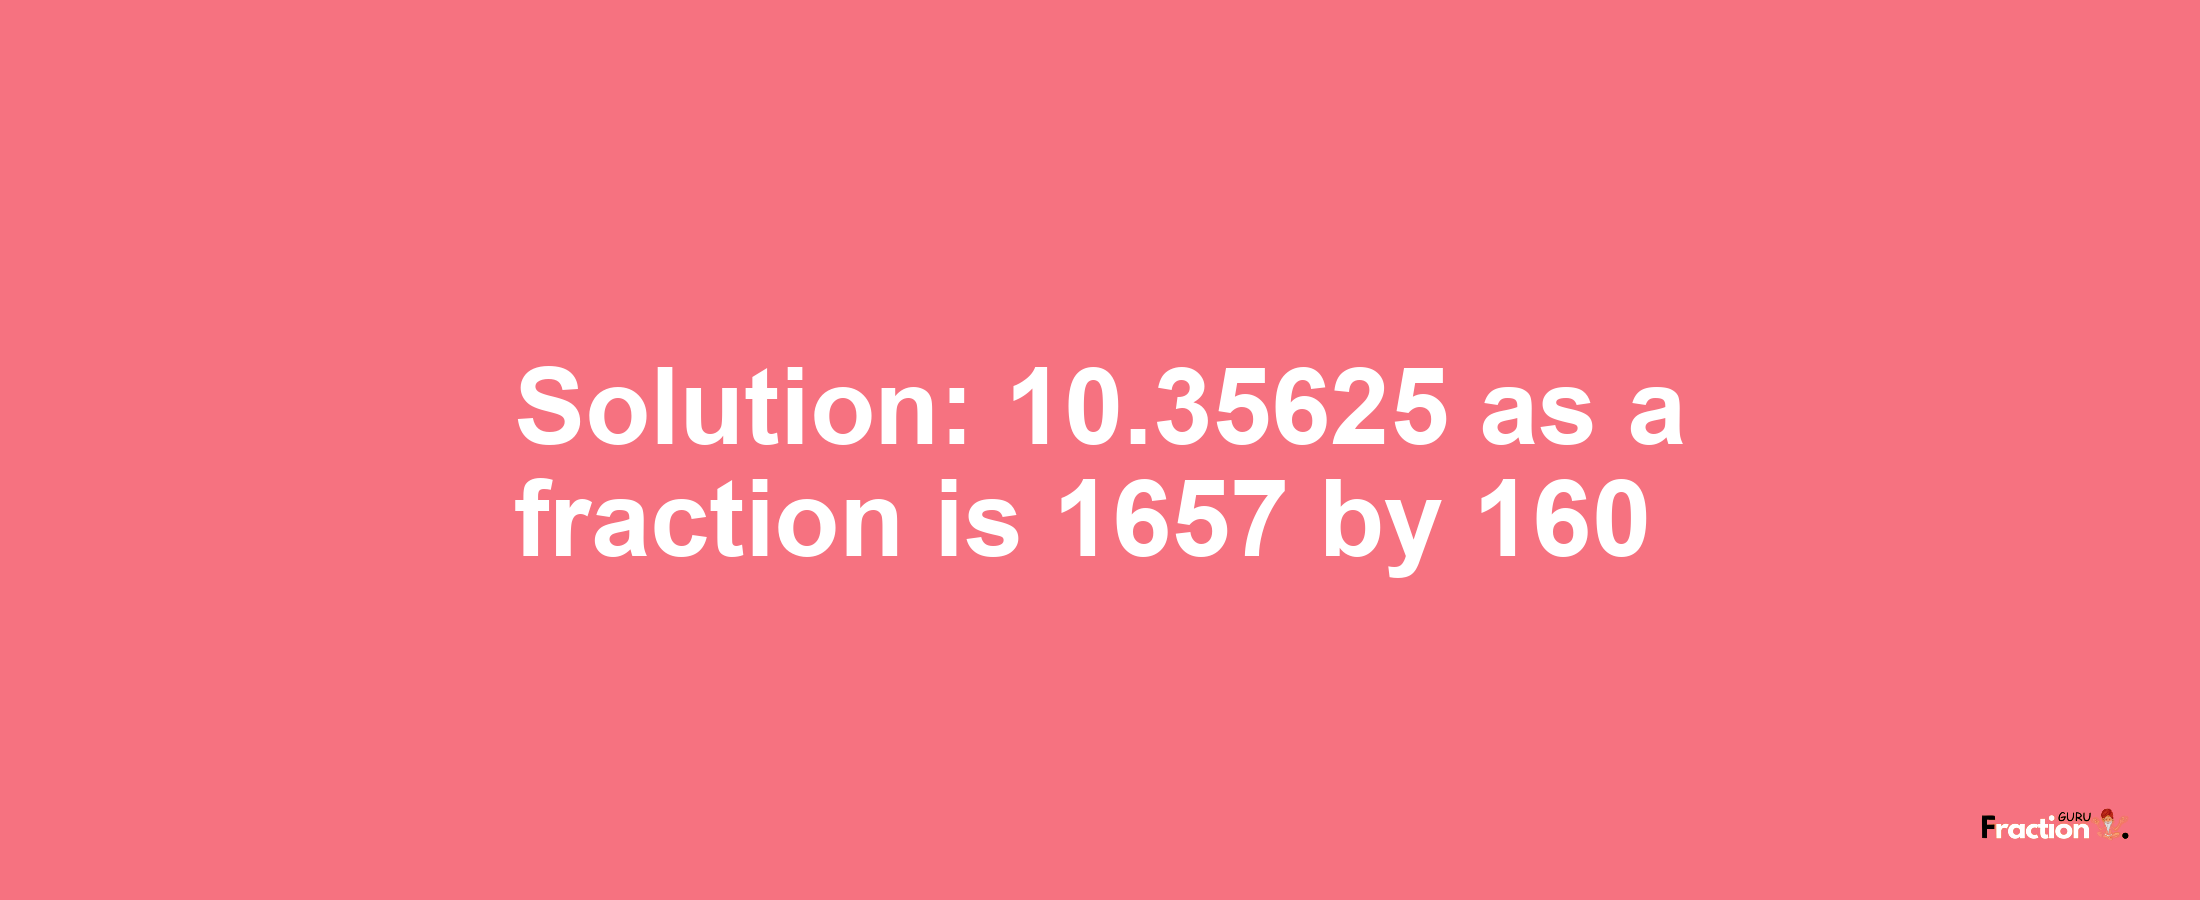 Solution:10.35625 as a fraction is 1657/160